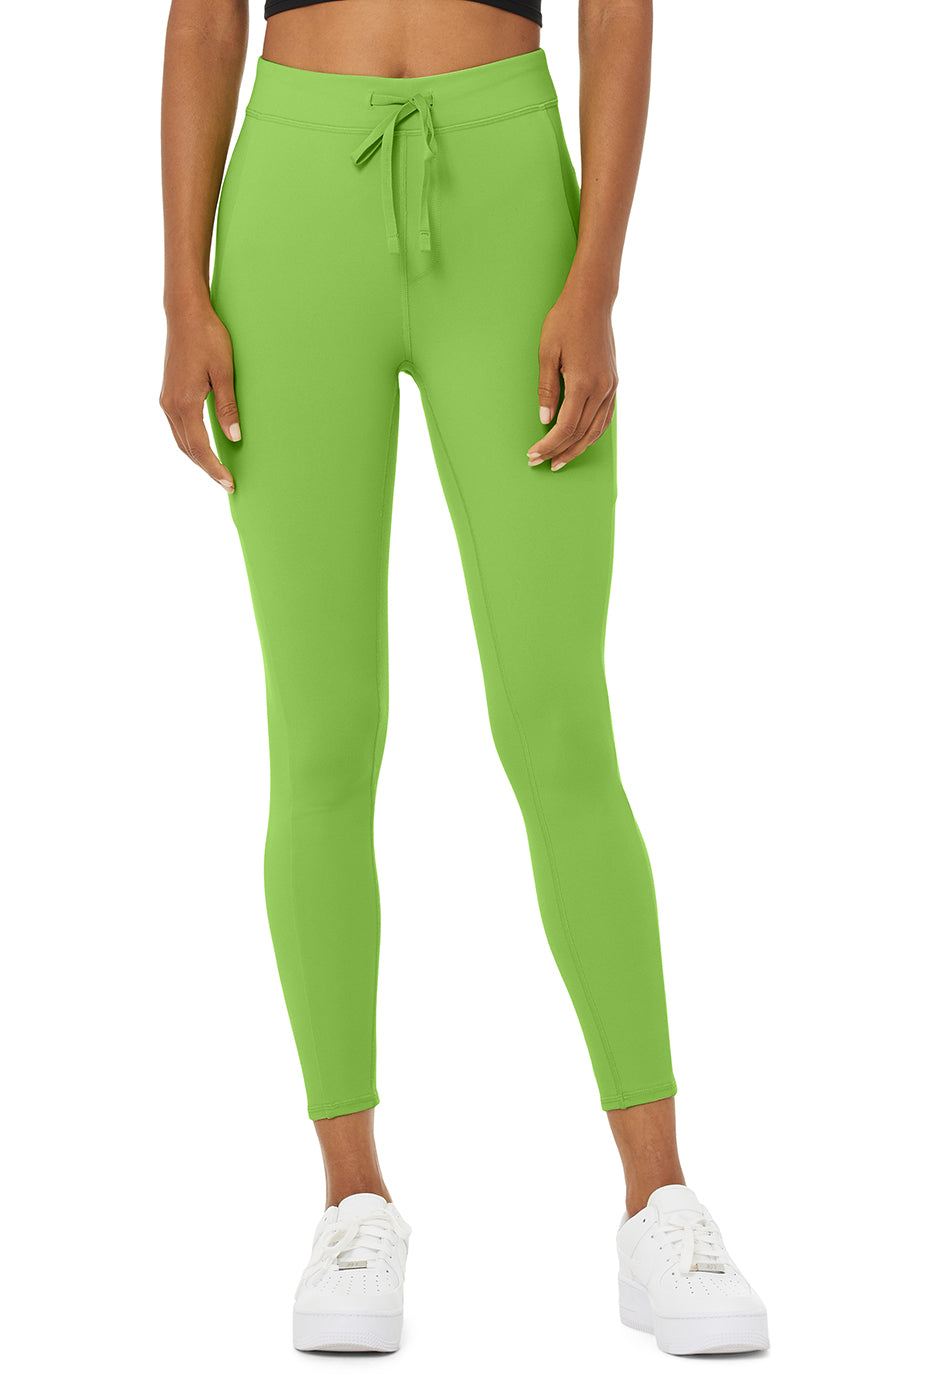 7/8 High-Waist Checkpoint Legging in Green Apple by Alo Yoga